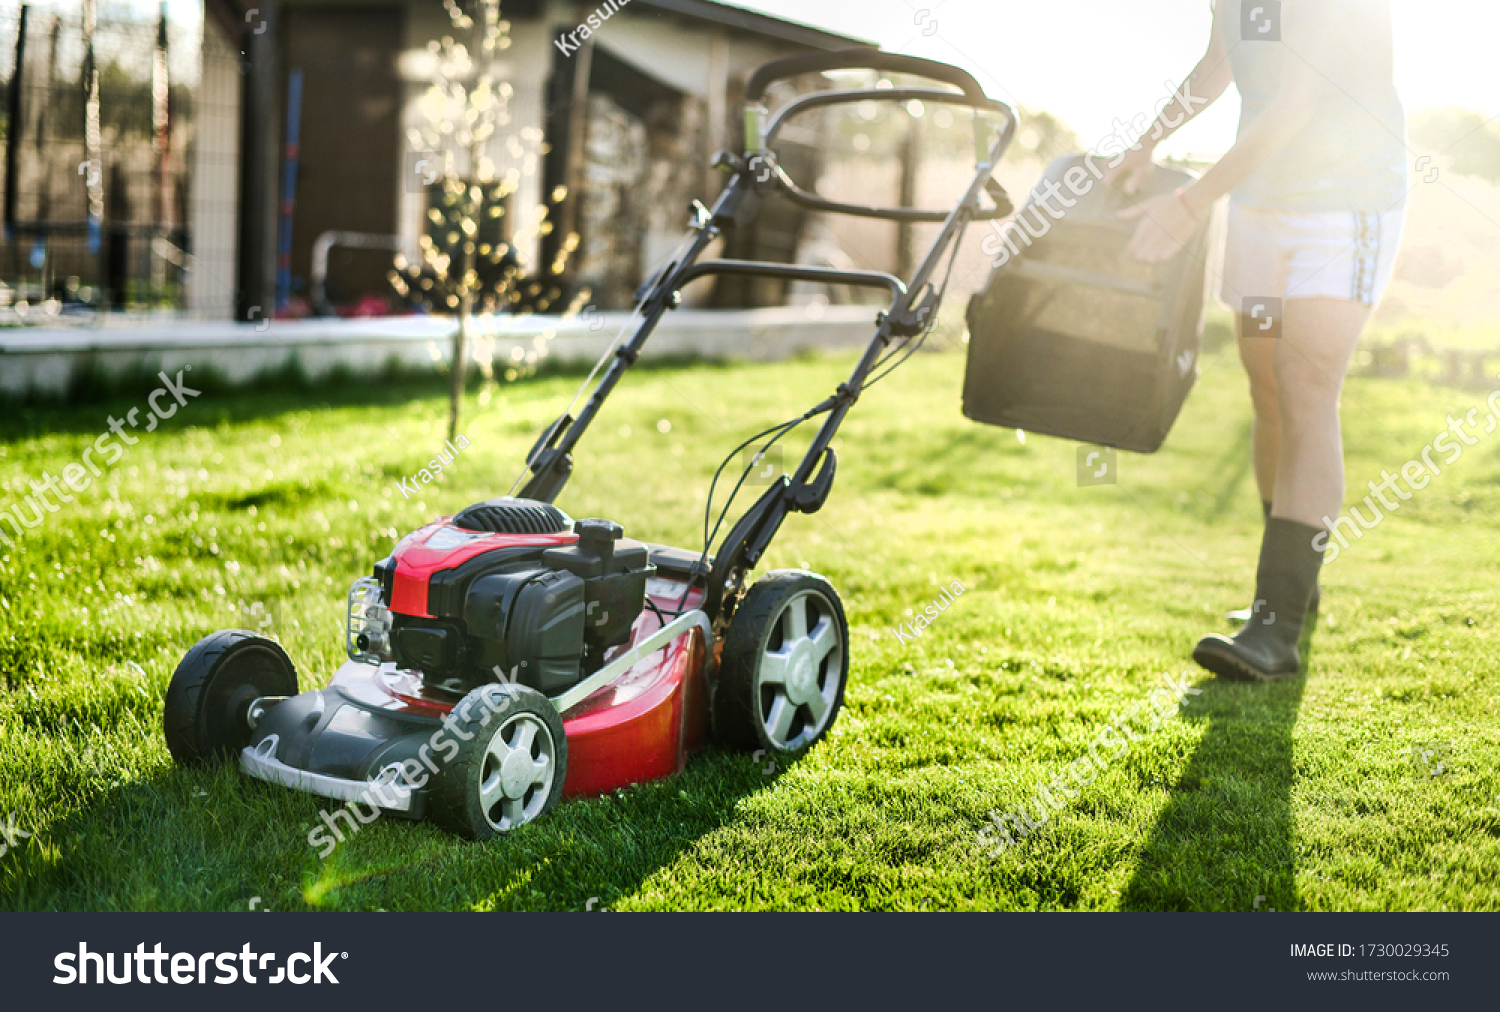 Lawn mover on green grass in modern garden. Machine for cutting lawns. #1730029345